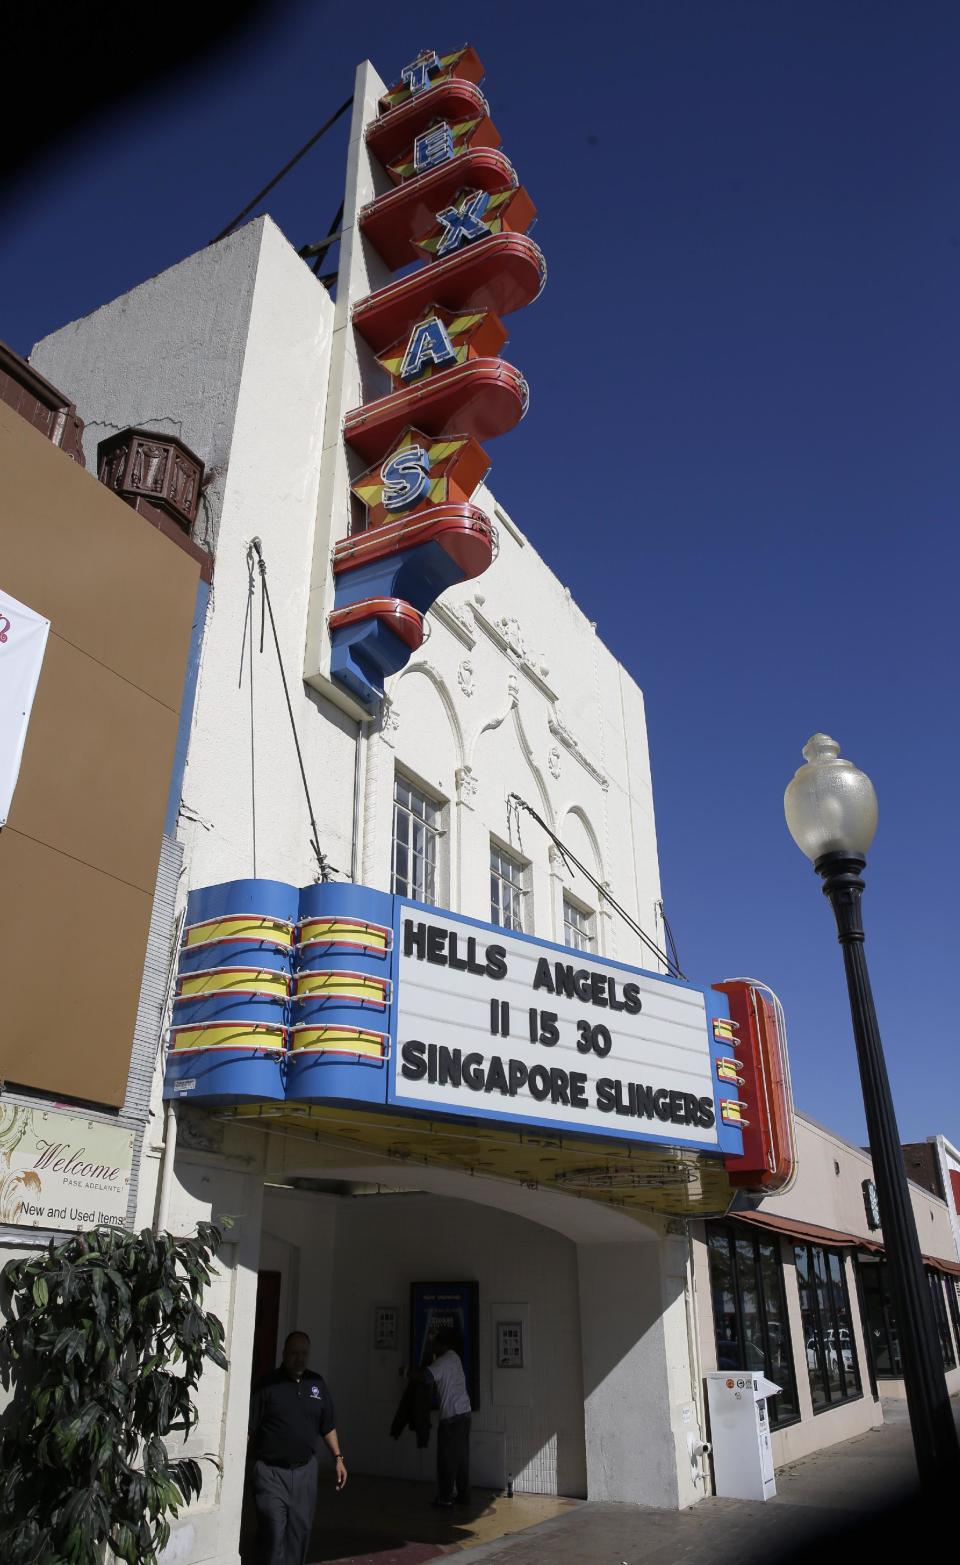 The Texas Theatre is shown in the Oak Cliff section of Dallas, Thursday, Oct. 31, 2013. Lee Harvery Oswald was arrested inside the theater Nov. 22, 1963, after the assassination of President John F. Kennedy. (AP Photo/LM Otero)